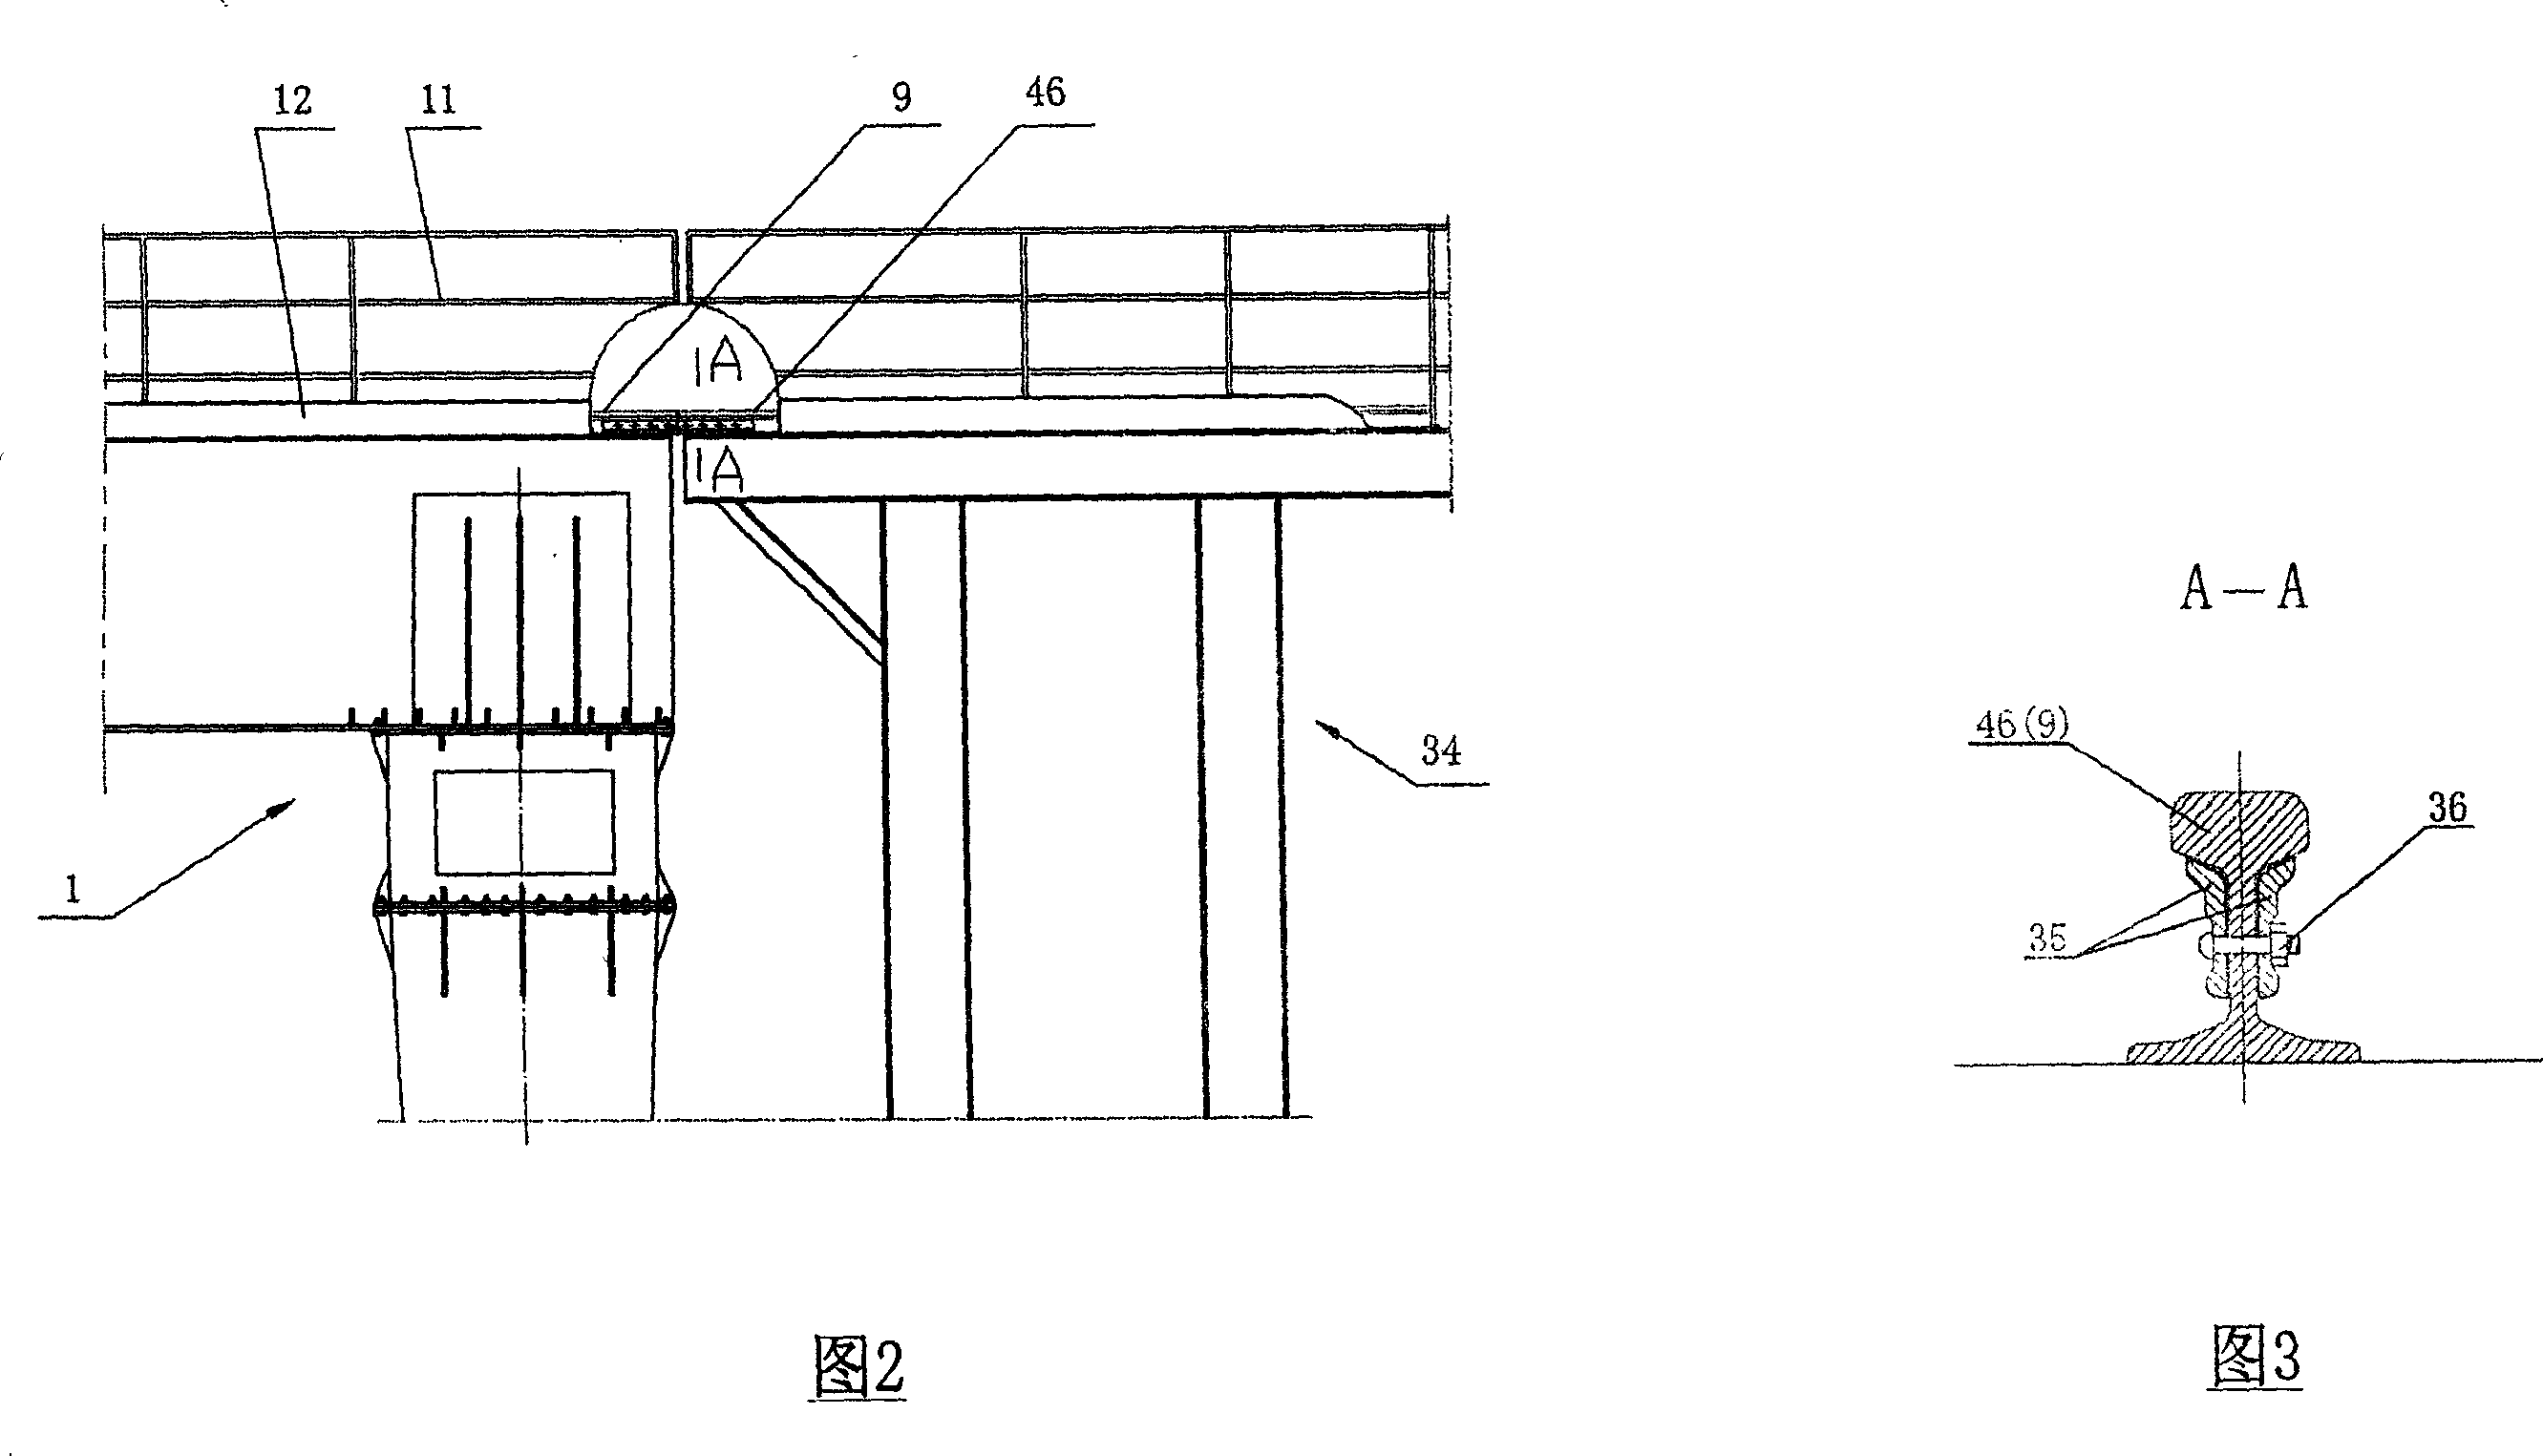 Method for constructing steel truss over existing railway line and transporting, mounting and positioning bogie